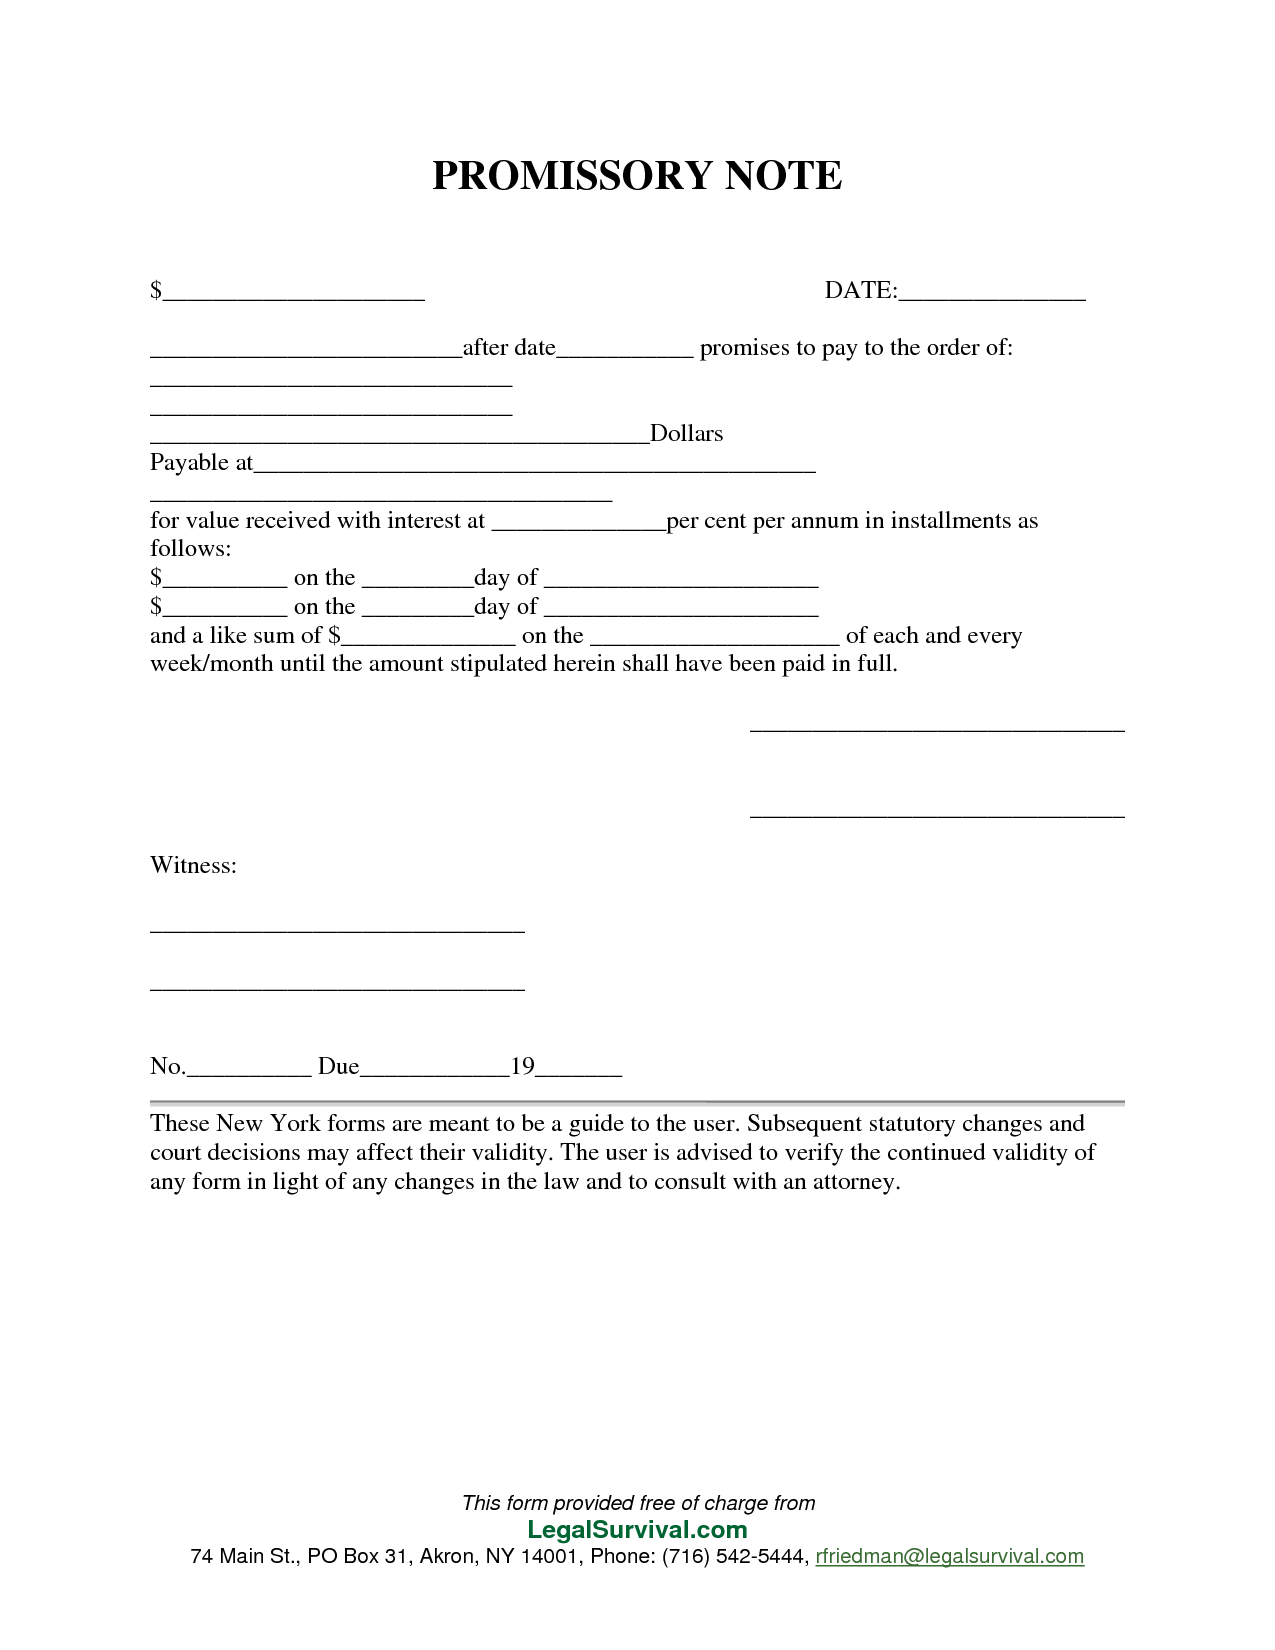 Permalink To Free Promissory Note Template | Templates, Printables - Free Printable Promissory Note